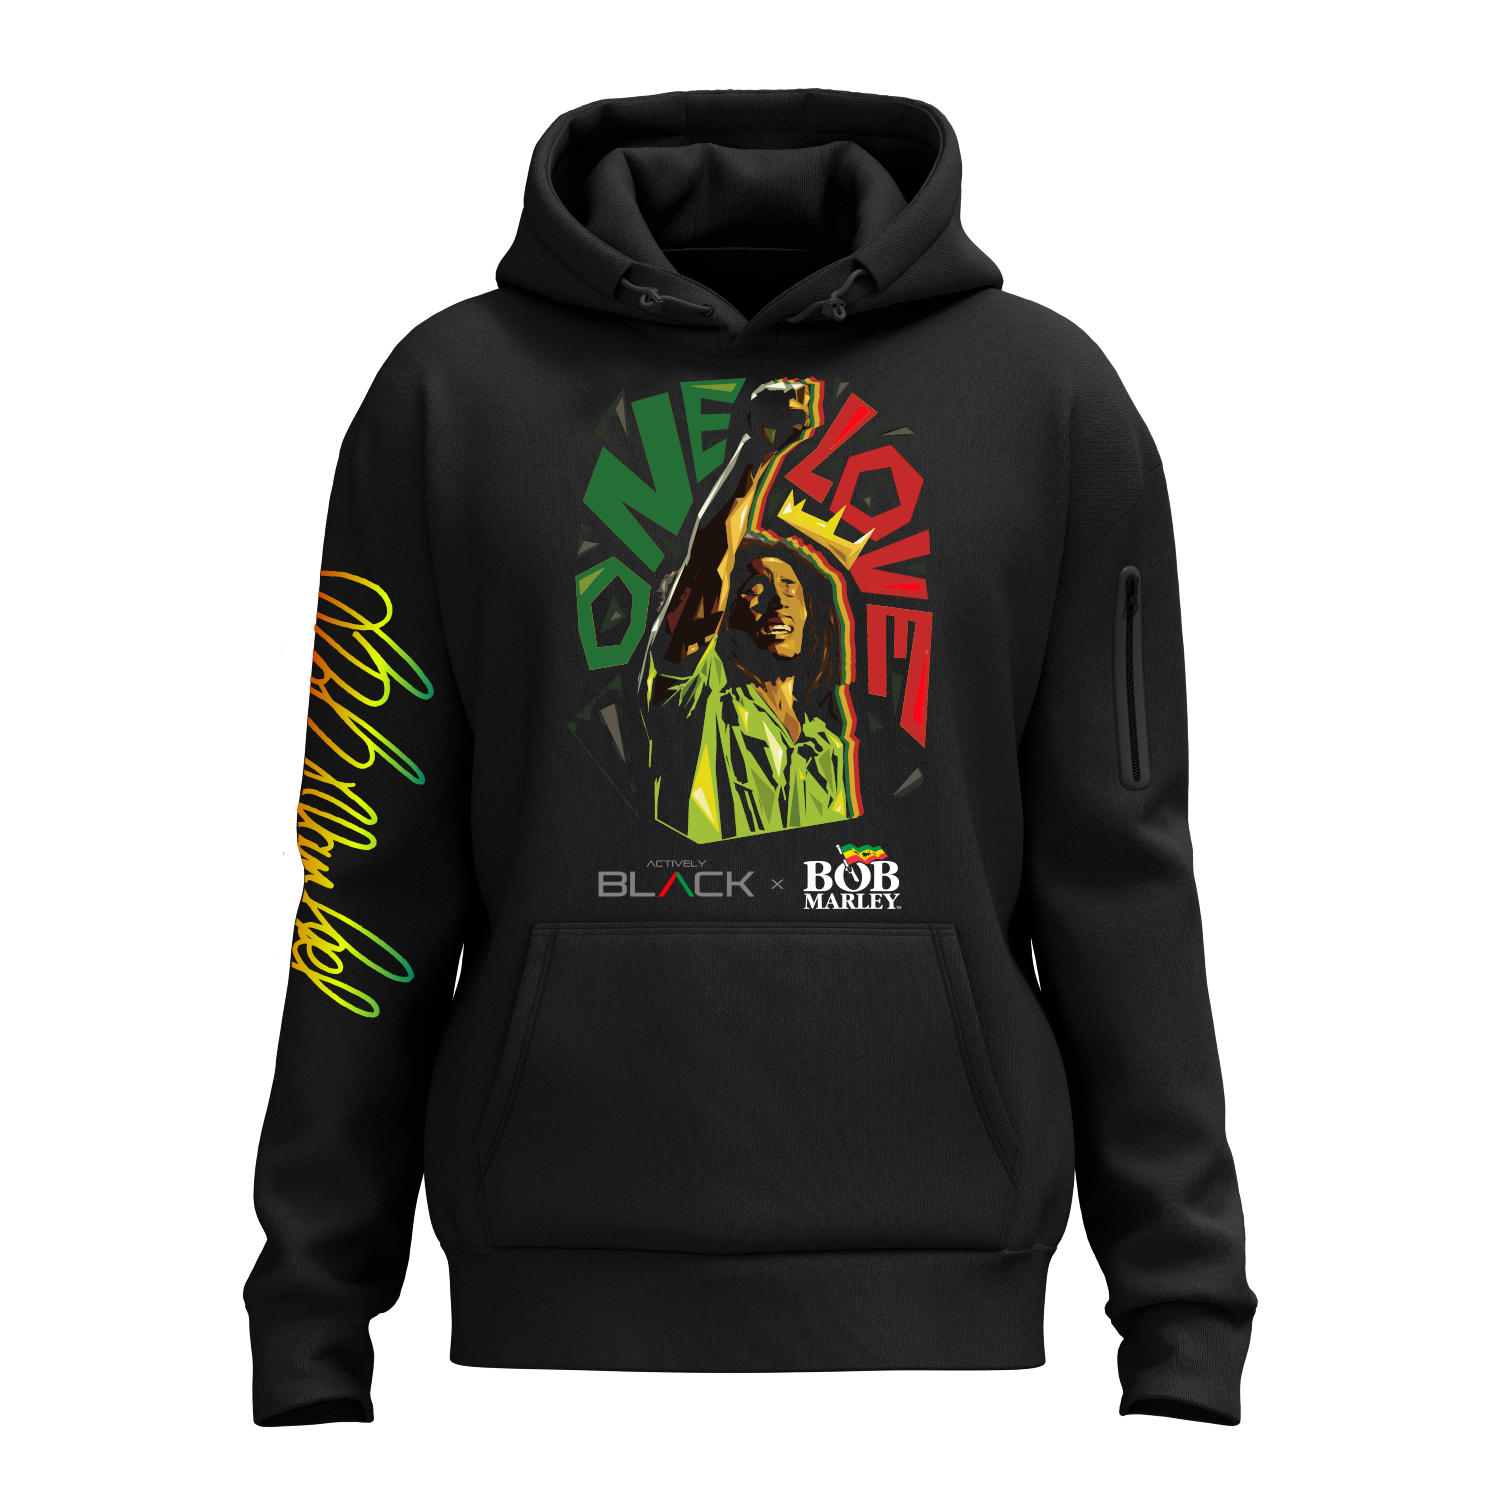 Bob Marley x Actively Black Performance Tech Hoodie